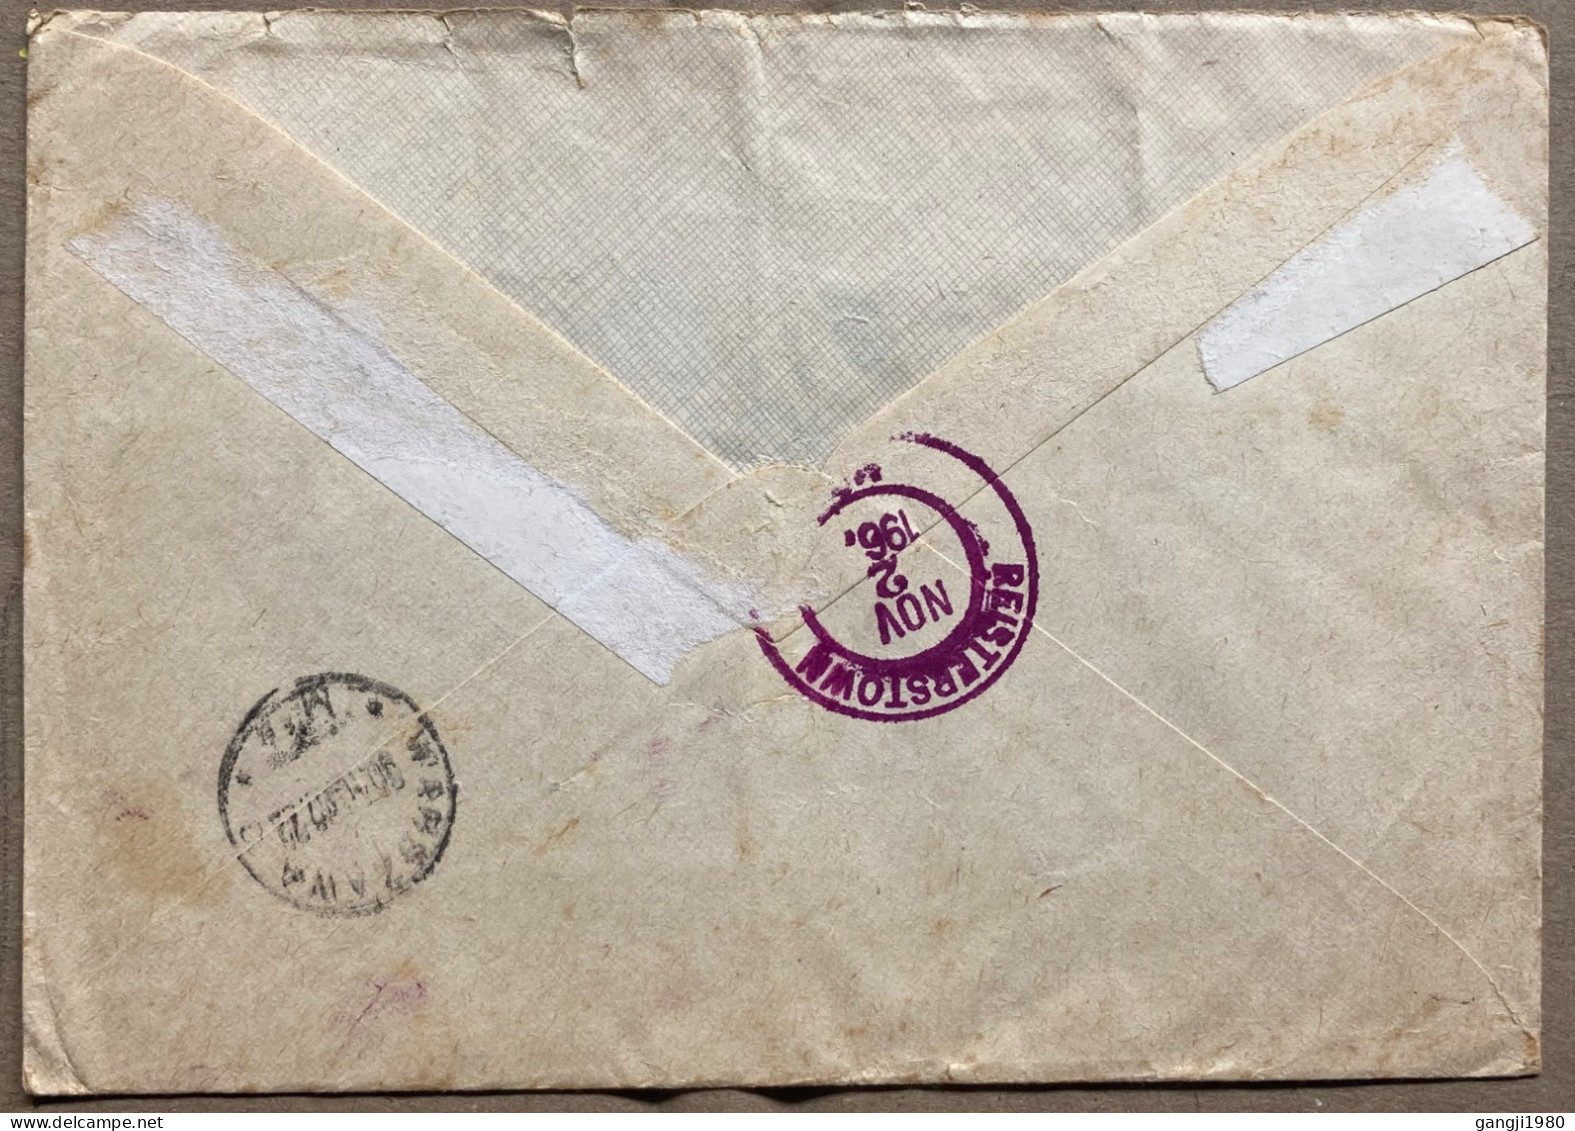 POLAND 1967, COVER USED TO USA, REGISTER, EXPRESS, AIRMAIL, 3 LABEL, FOREST ANIMAL ELK, KOSCIUSZKO, MEMORIAL, ZYRARDOW C - Lettres & Documents